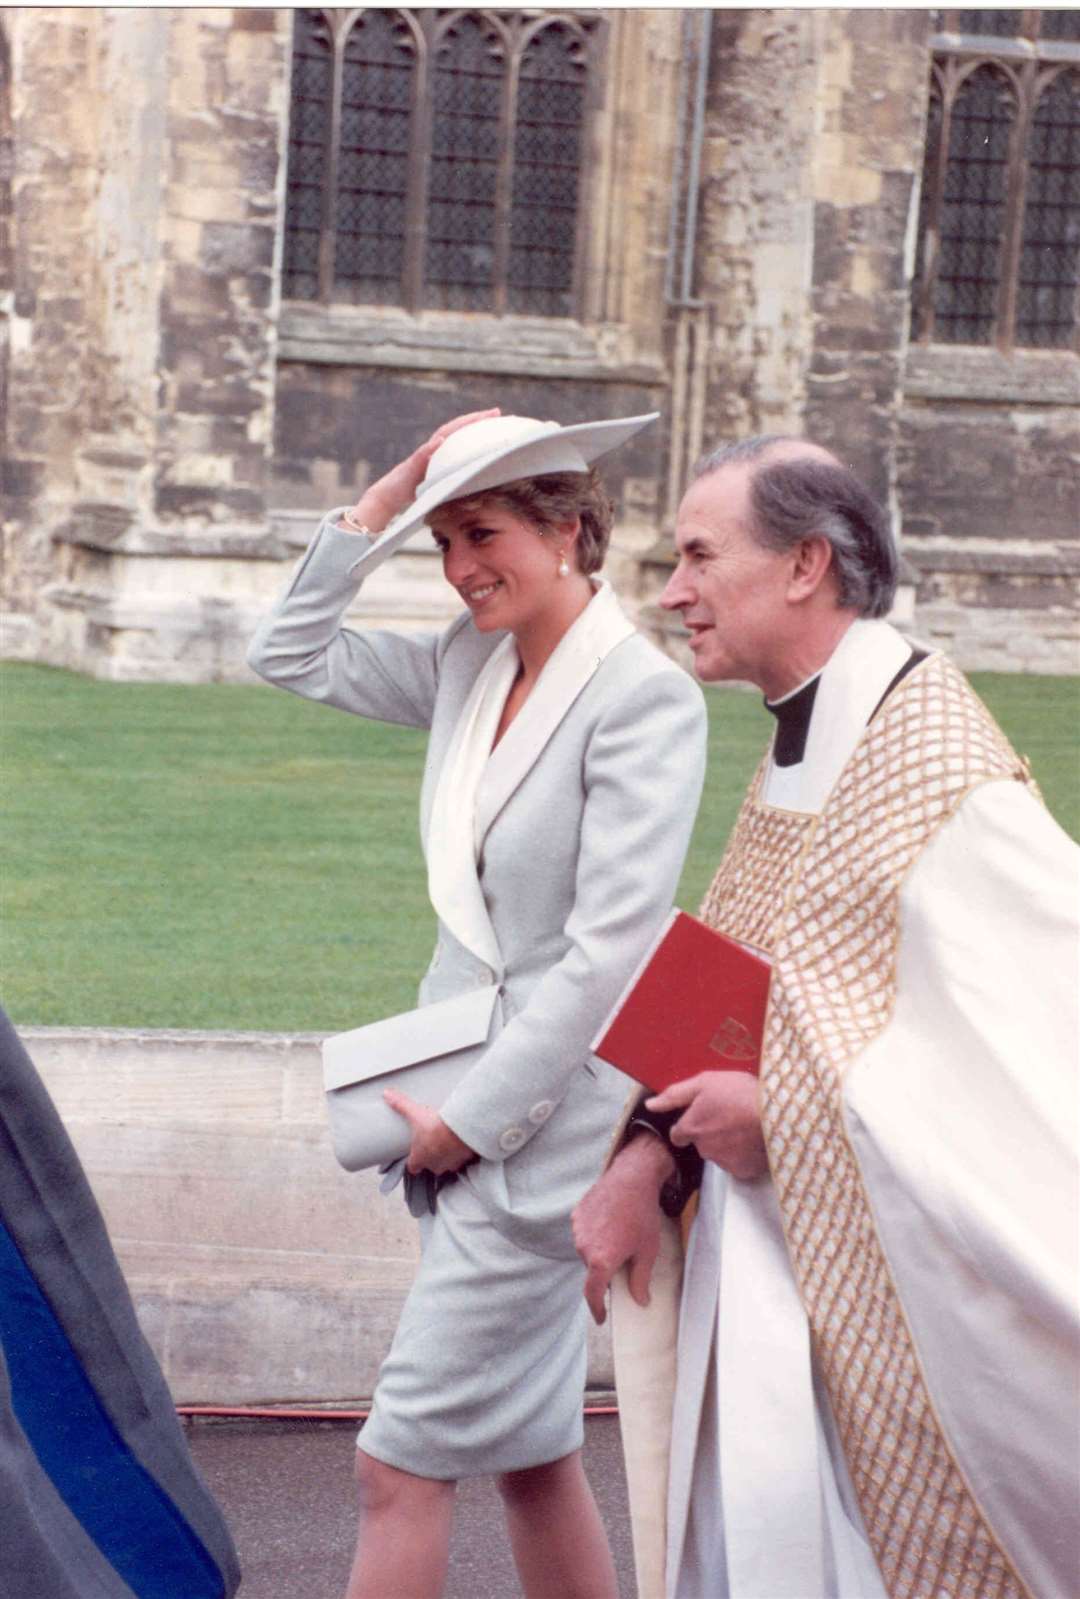 Princess Diana and Princess Margaret were among the crowds who braved wind and rain to attend the enthronement of Dr George Carey as Archbishop of Canterbury in April 1991